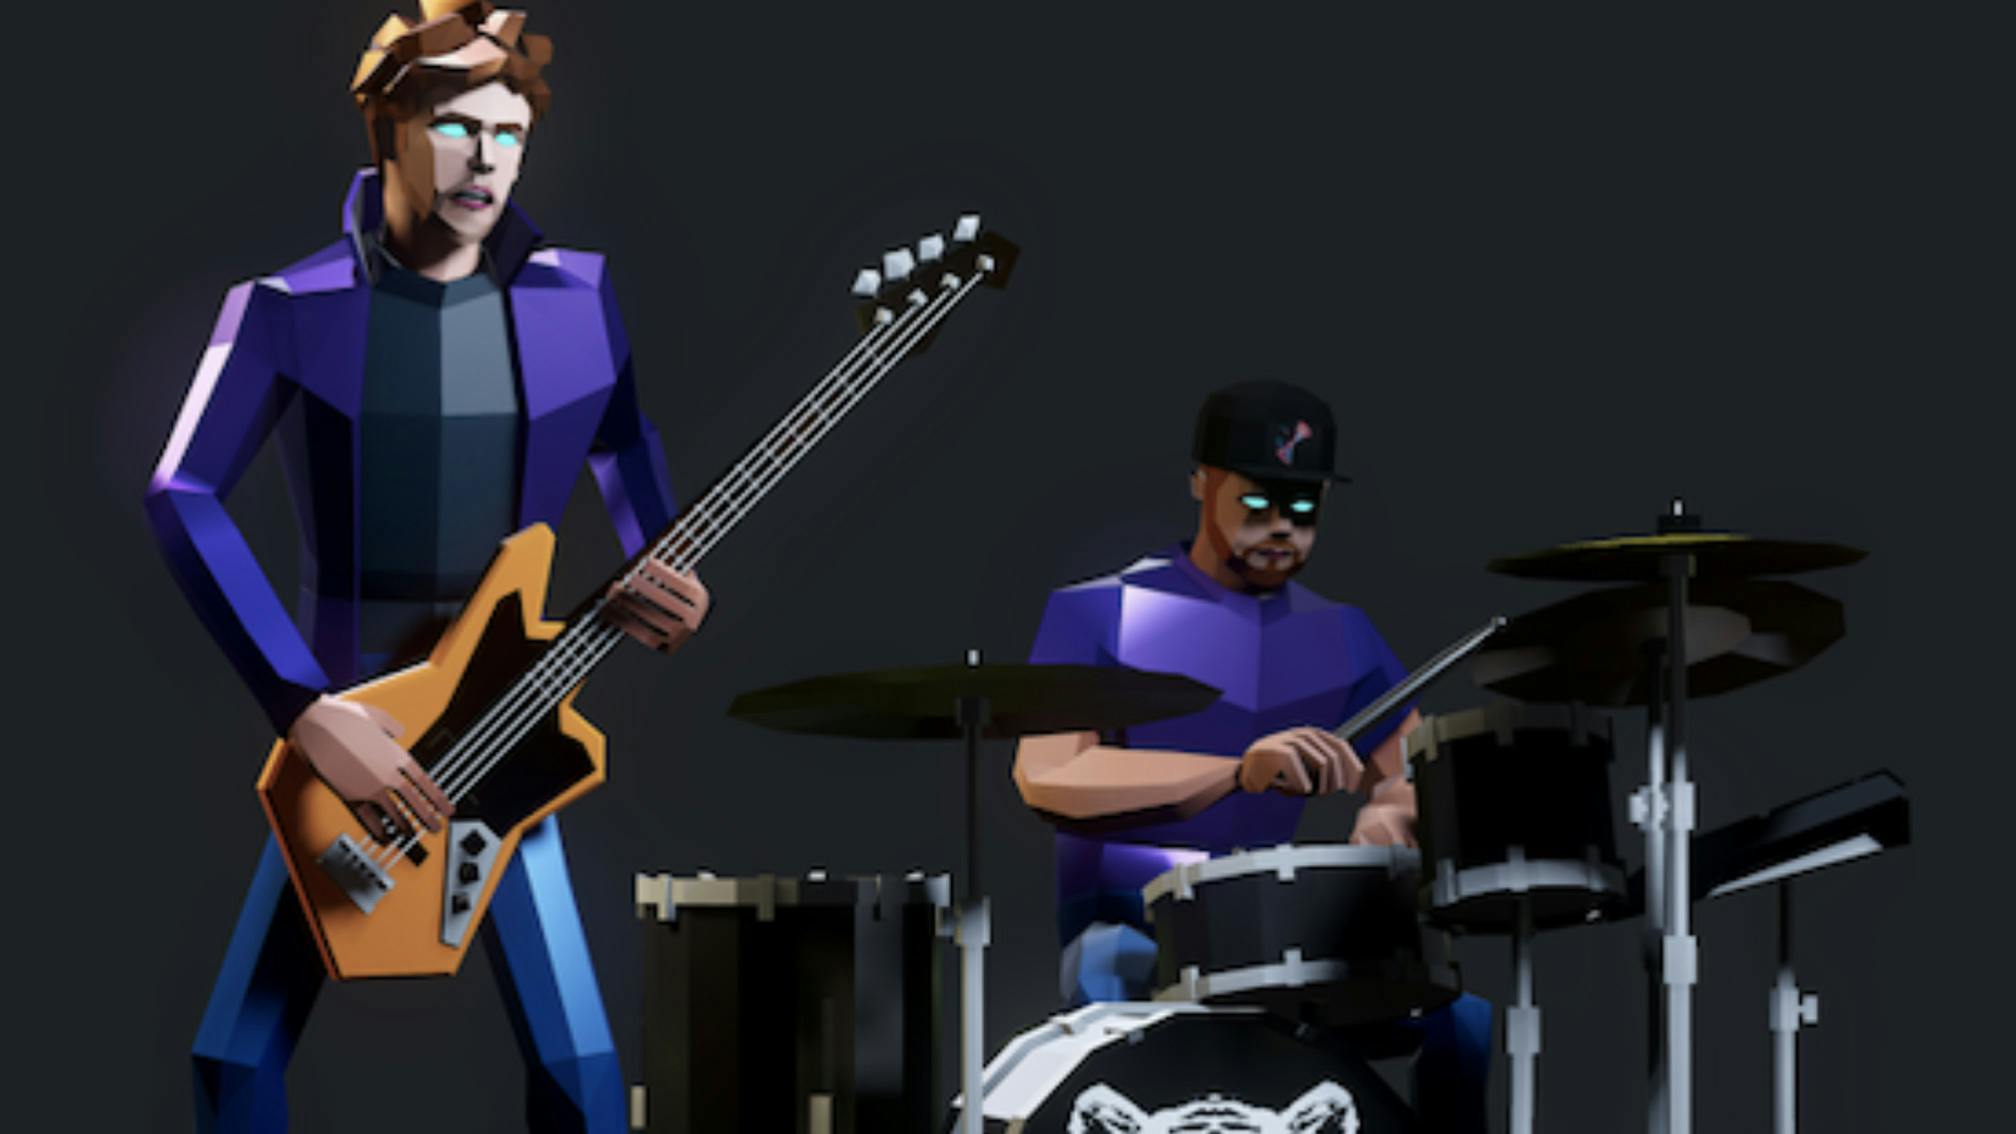 Royal Blood are performing a virtual three-song concert as avatars